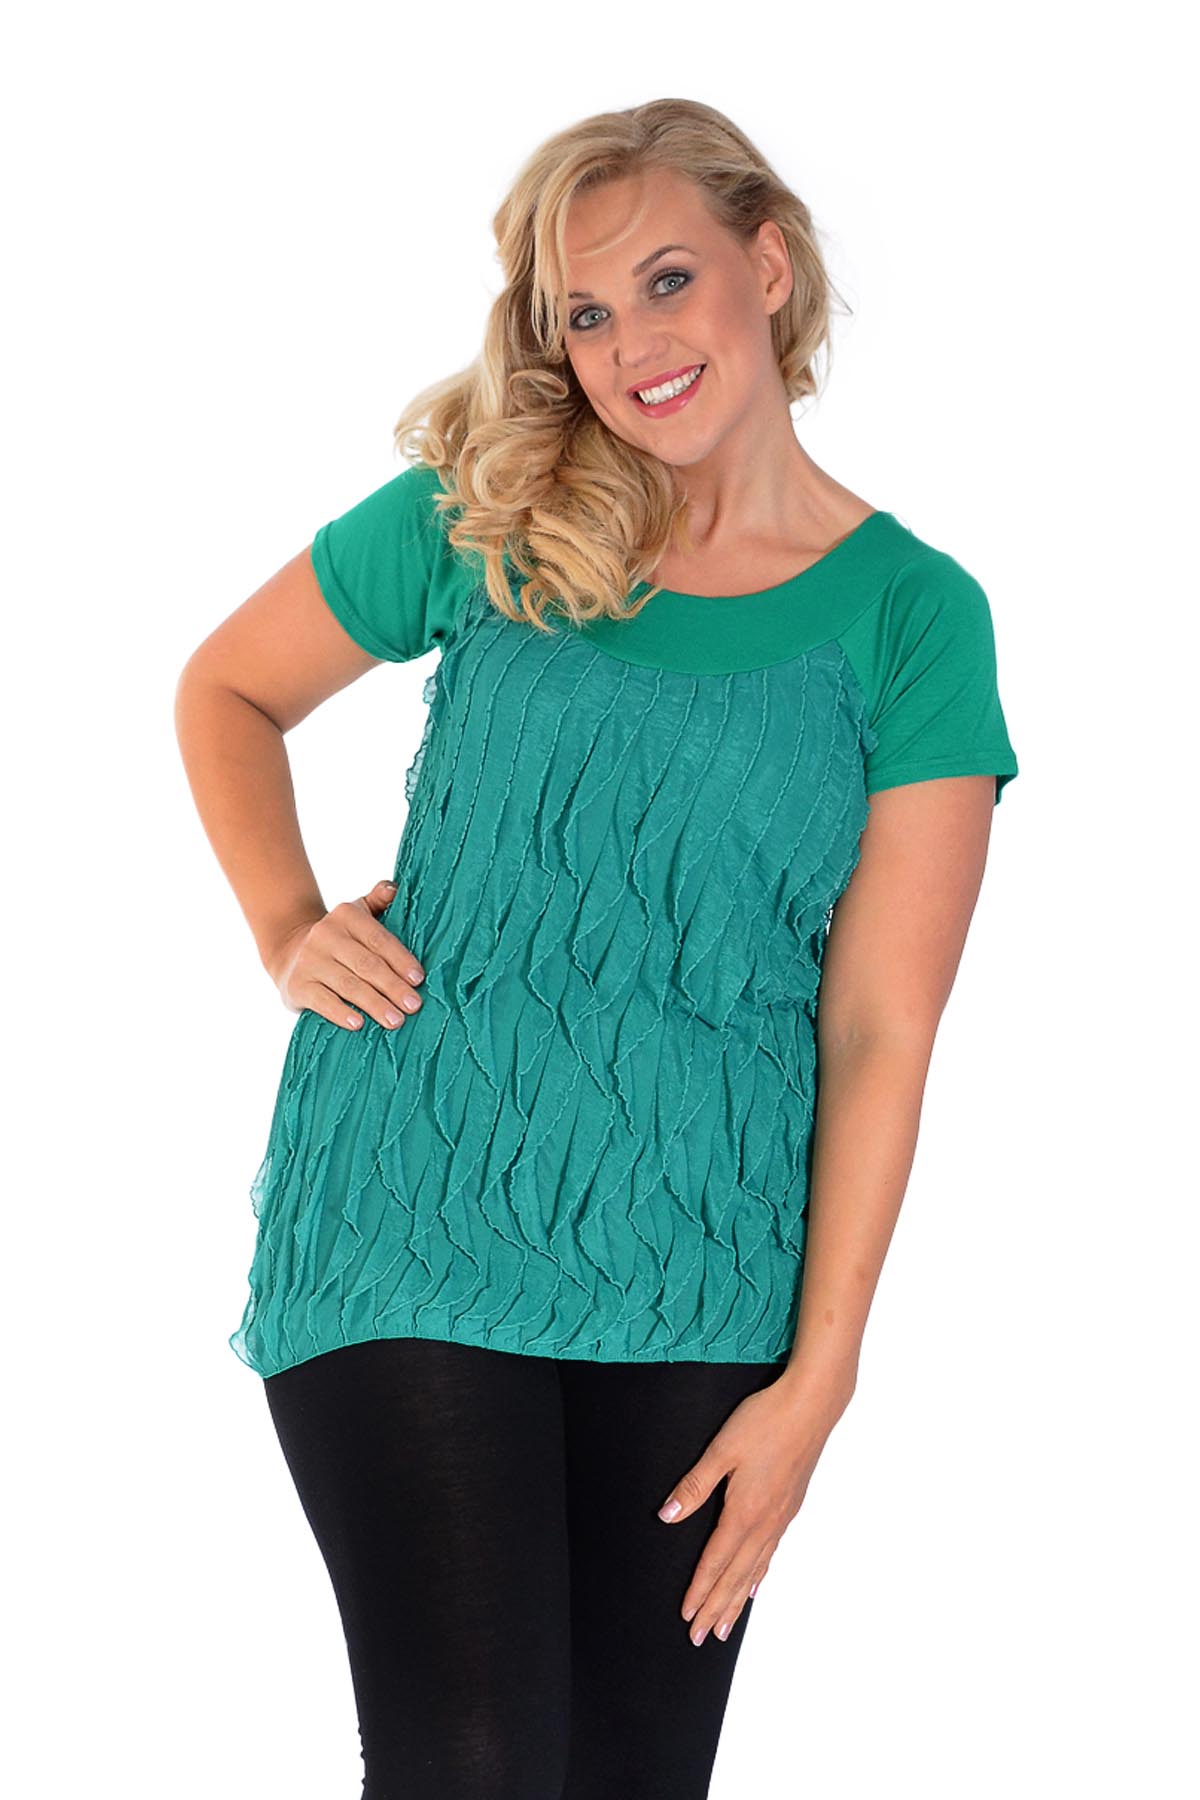 New Womens Top Plus Size Ladies Ruffle Short Sleeve Tunic Sale Stretch Nouvelle | eBay